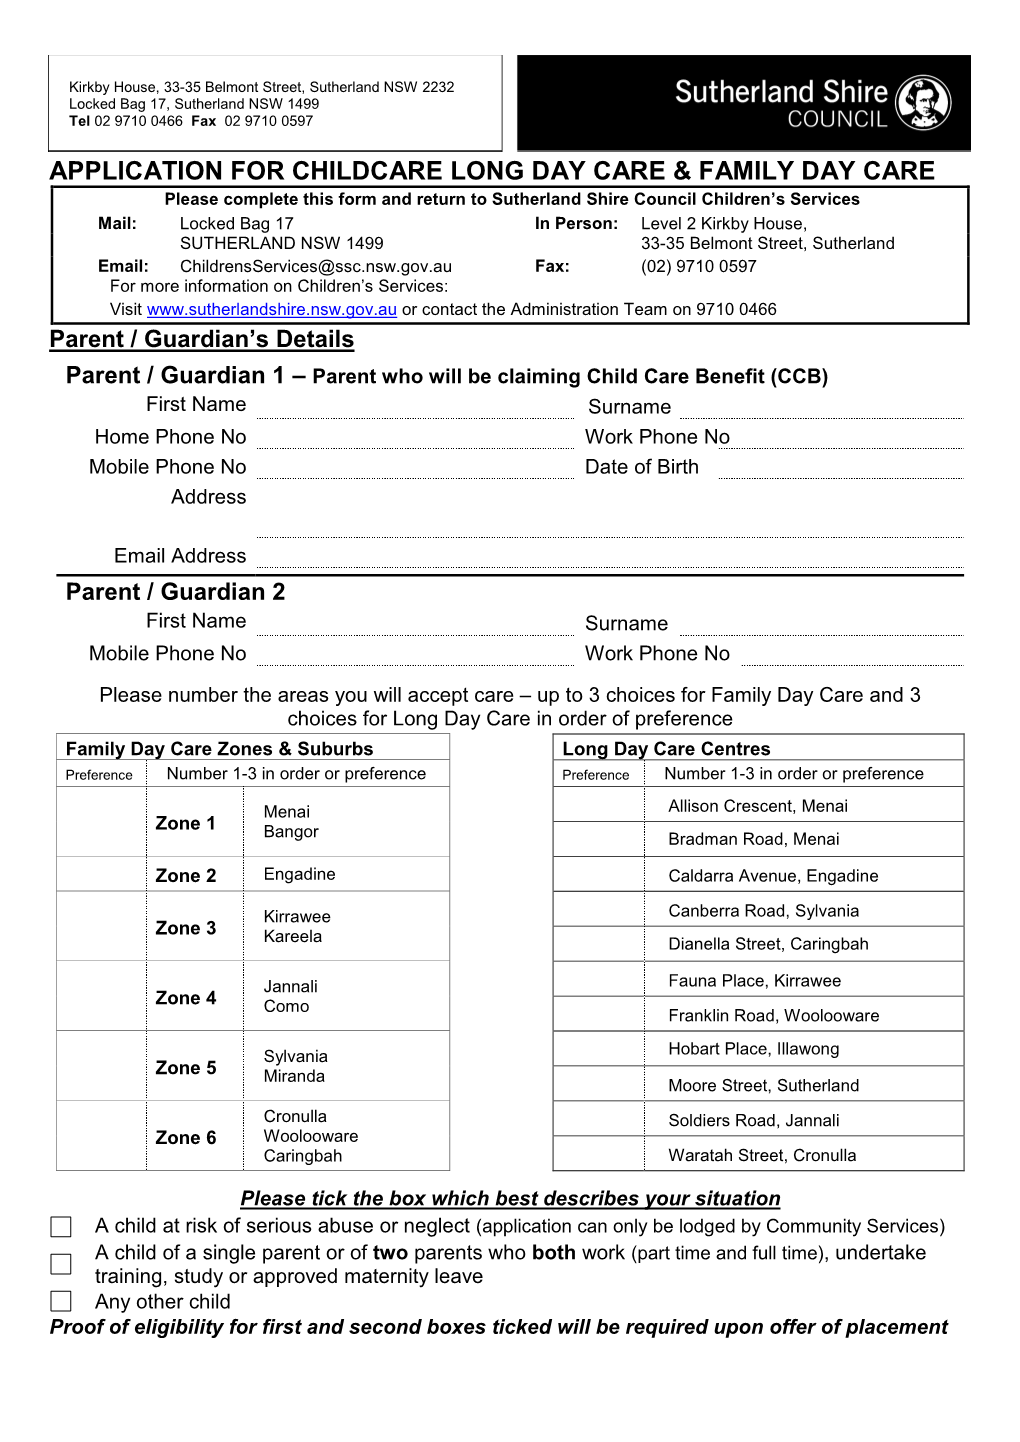 Application for Childcare Long Day Care & Family Day